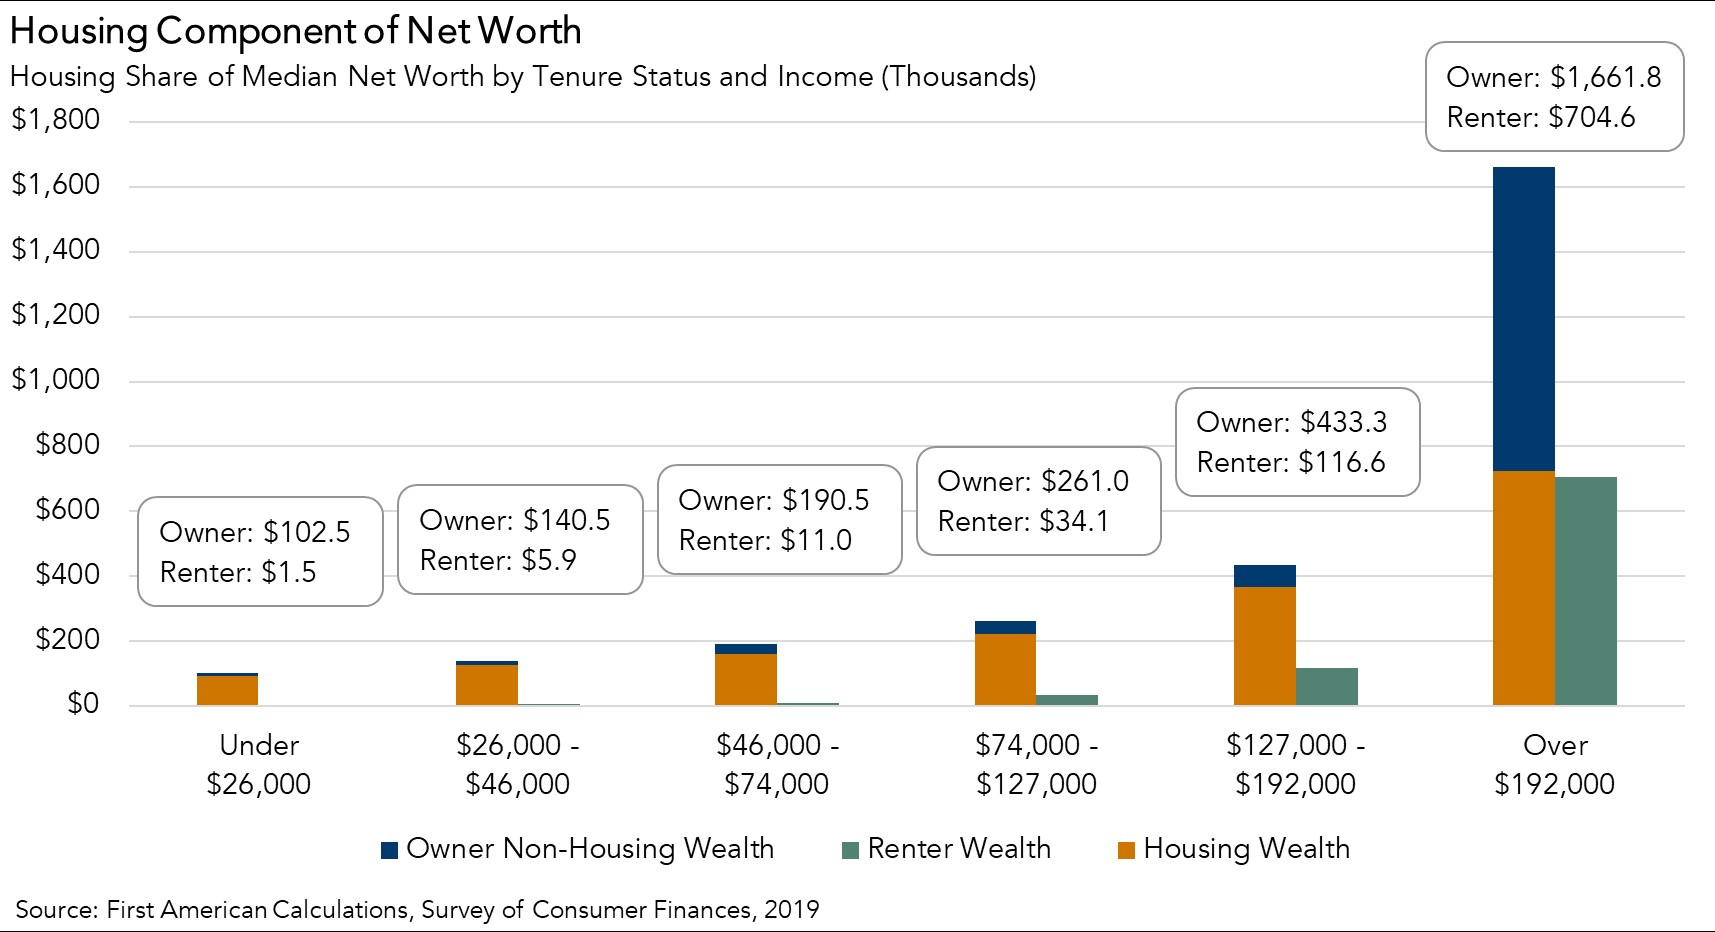 Housing Component of Net Worth Chart 2019